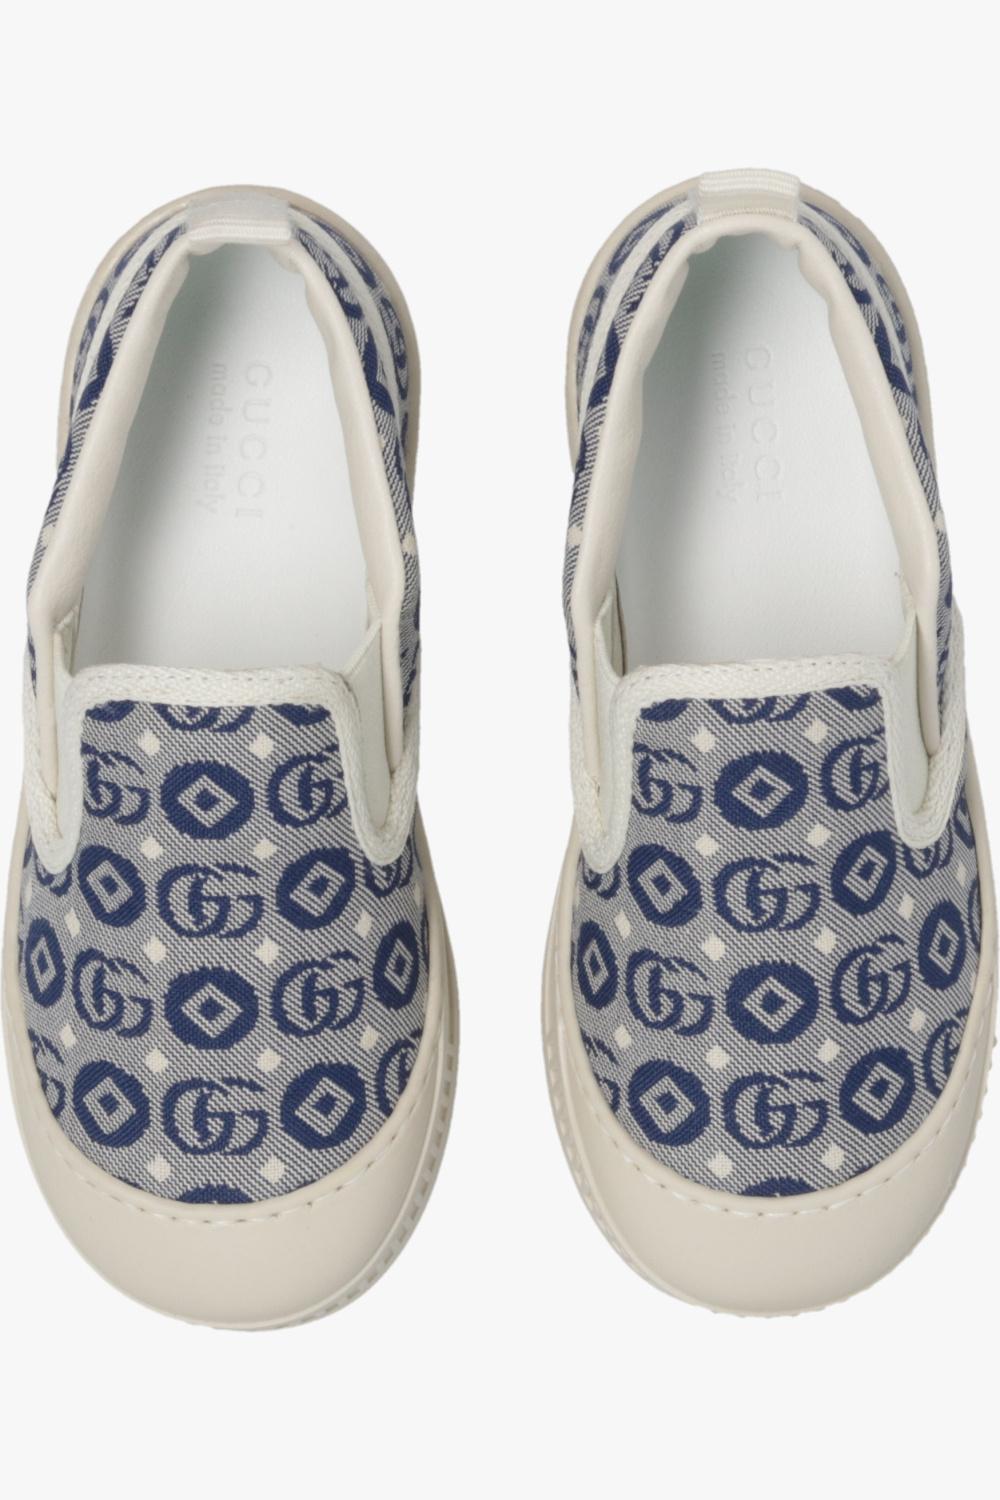 Gucci Kids Slip-on detail shoes